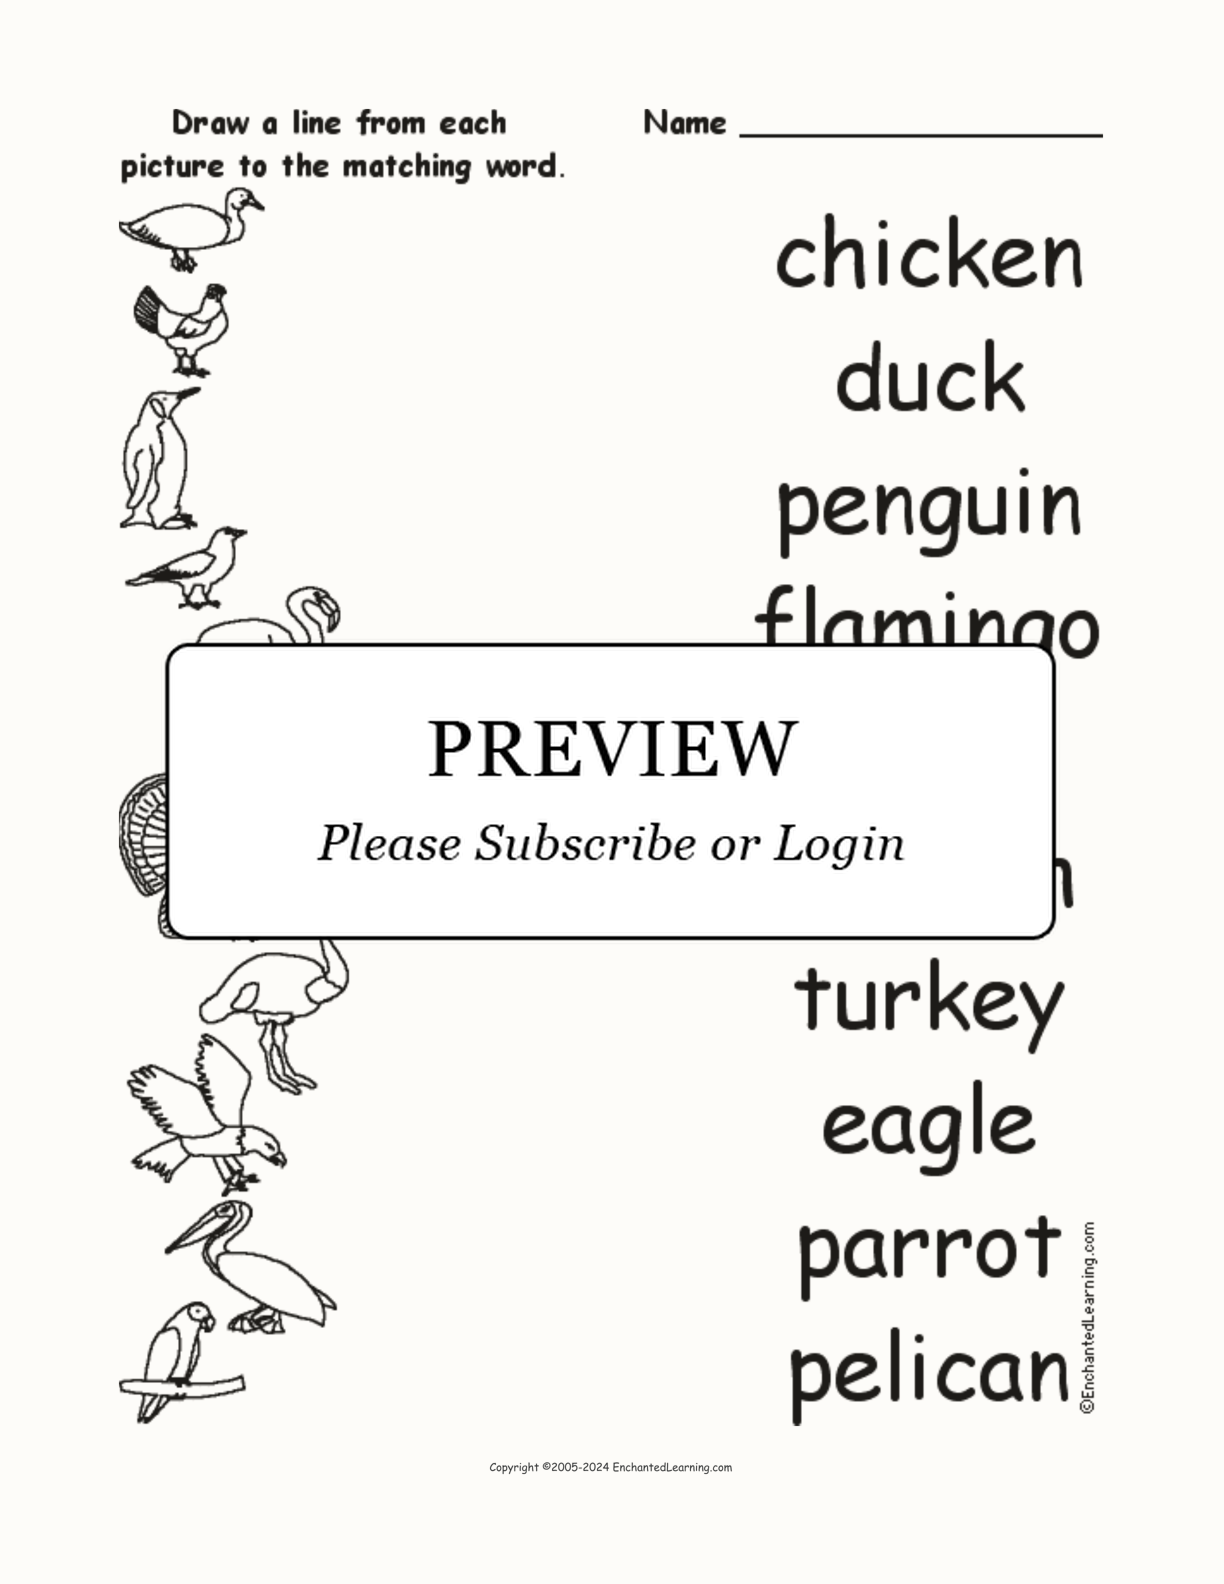 Birds - Match the Words to the Pictures interactive worksheet page 1